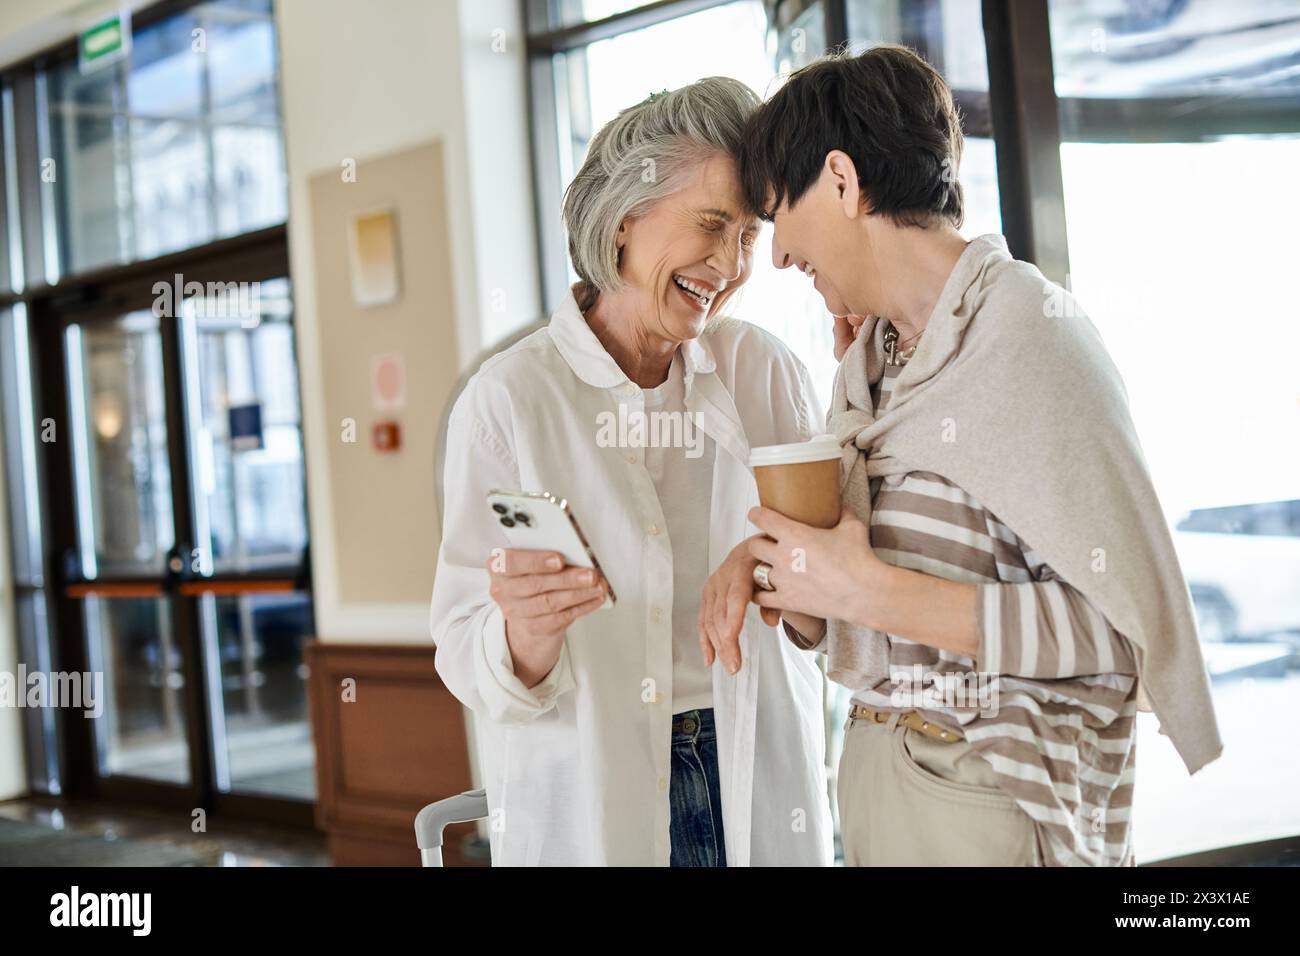 Two loving senior lesbian women standing in a hotel, embracing each other tenderly. Stock Photo